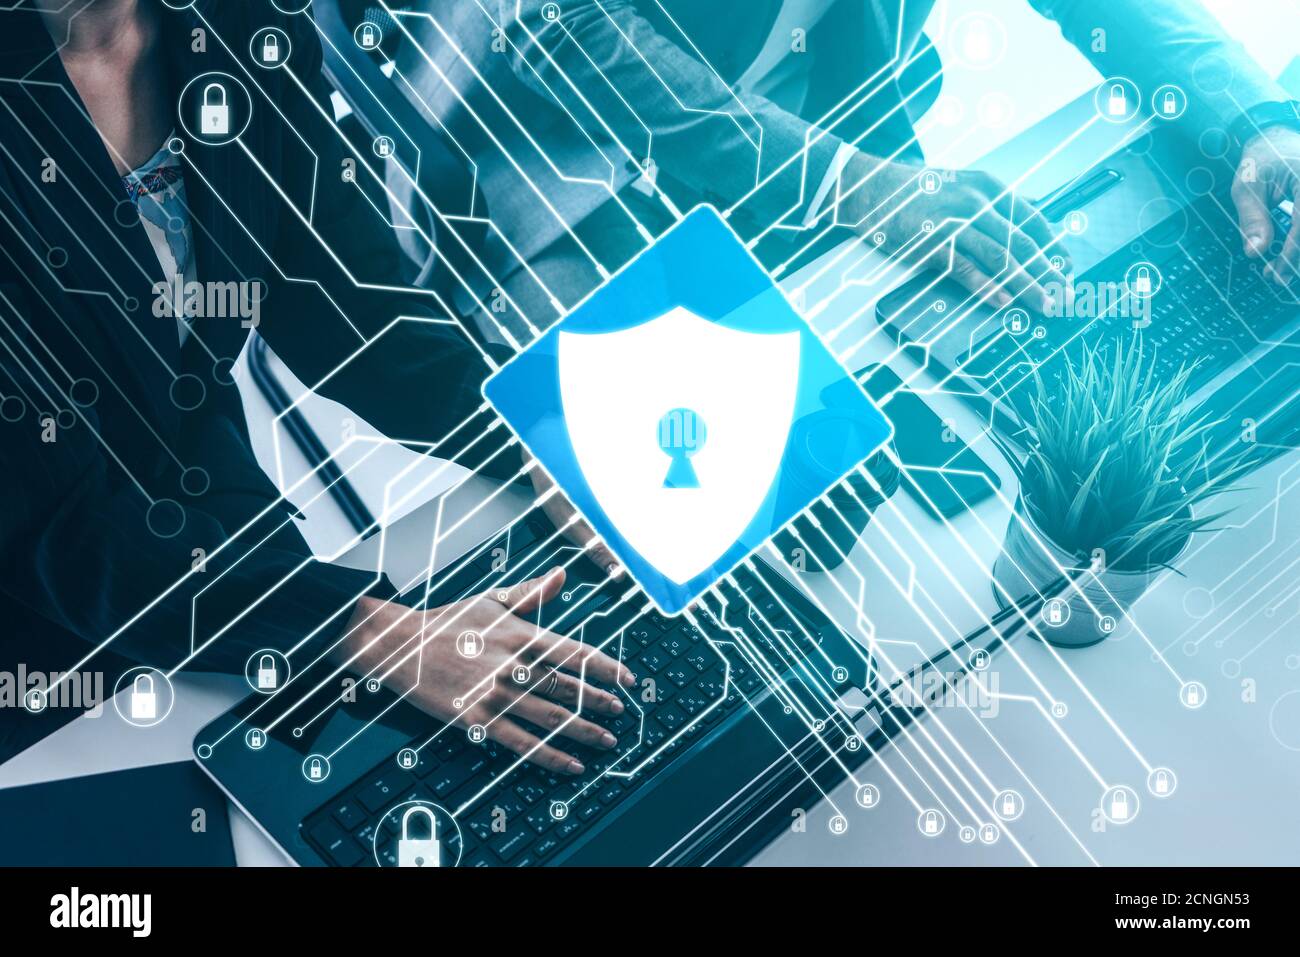 Cyber Security and Digital Data Protection Concept. Icon graphic interface showing secure firewall technology for online data access defense against Stock Photo